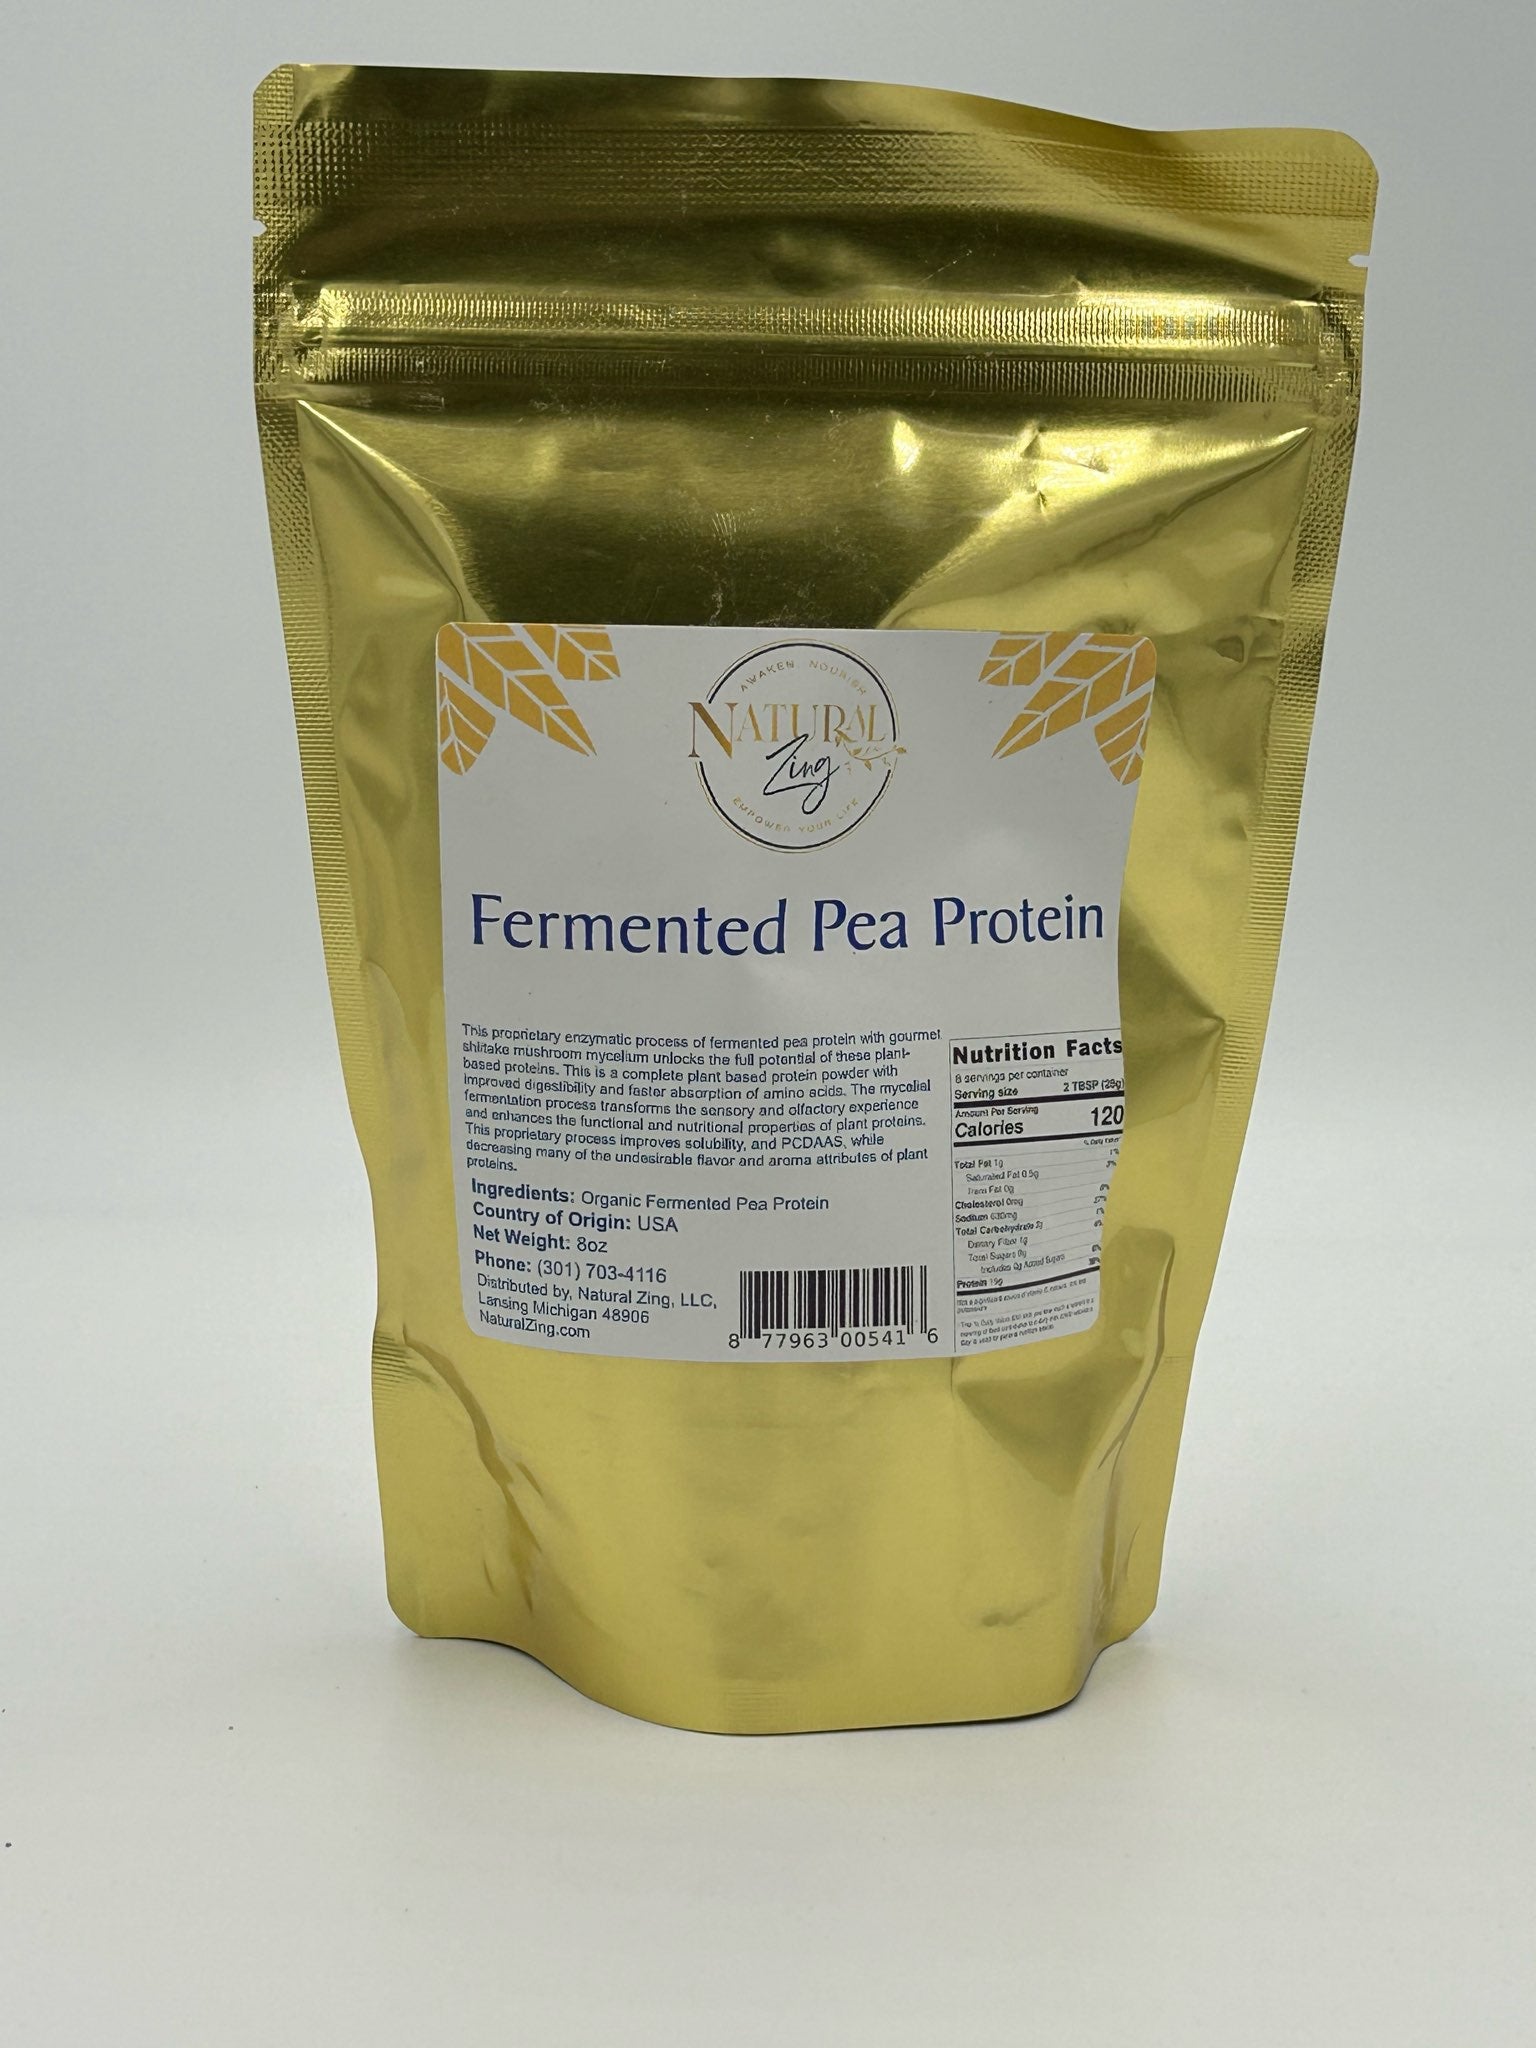 Fermented Pea Protein Powder 8 oz - Natural Zing